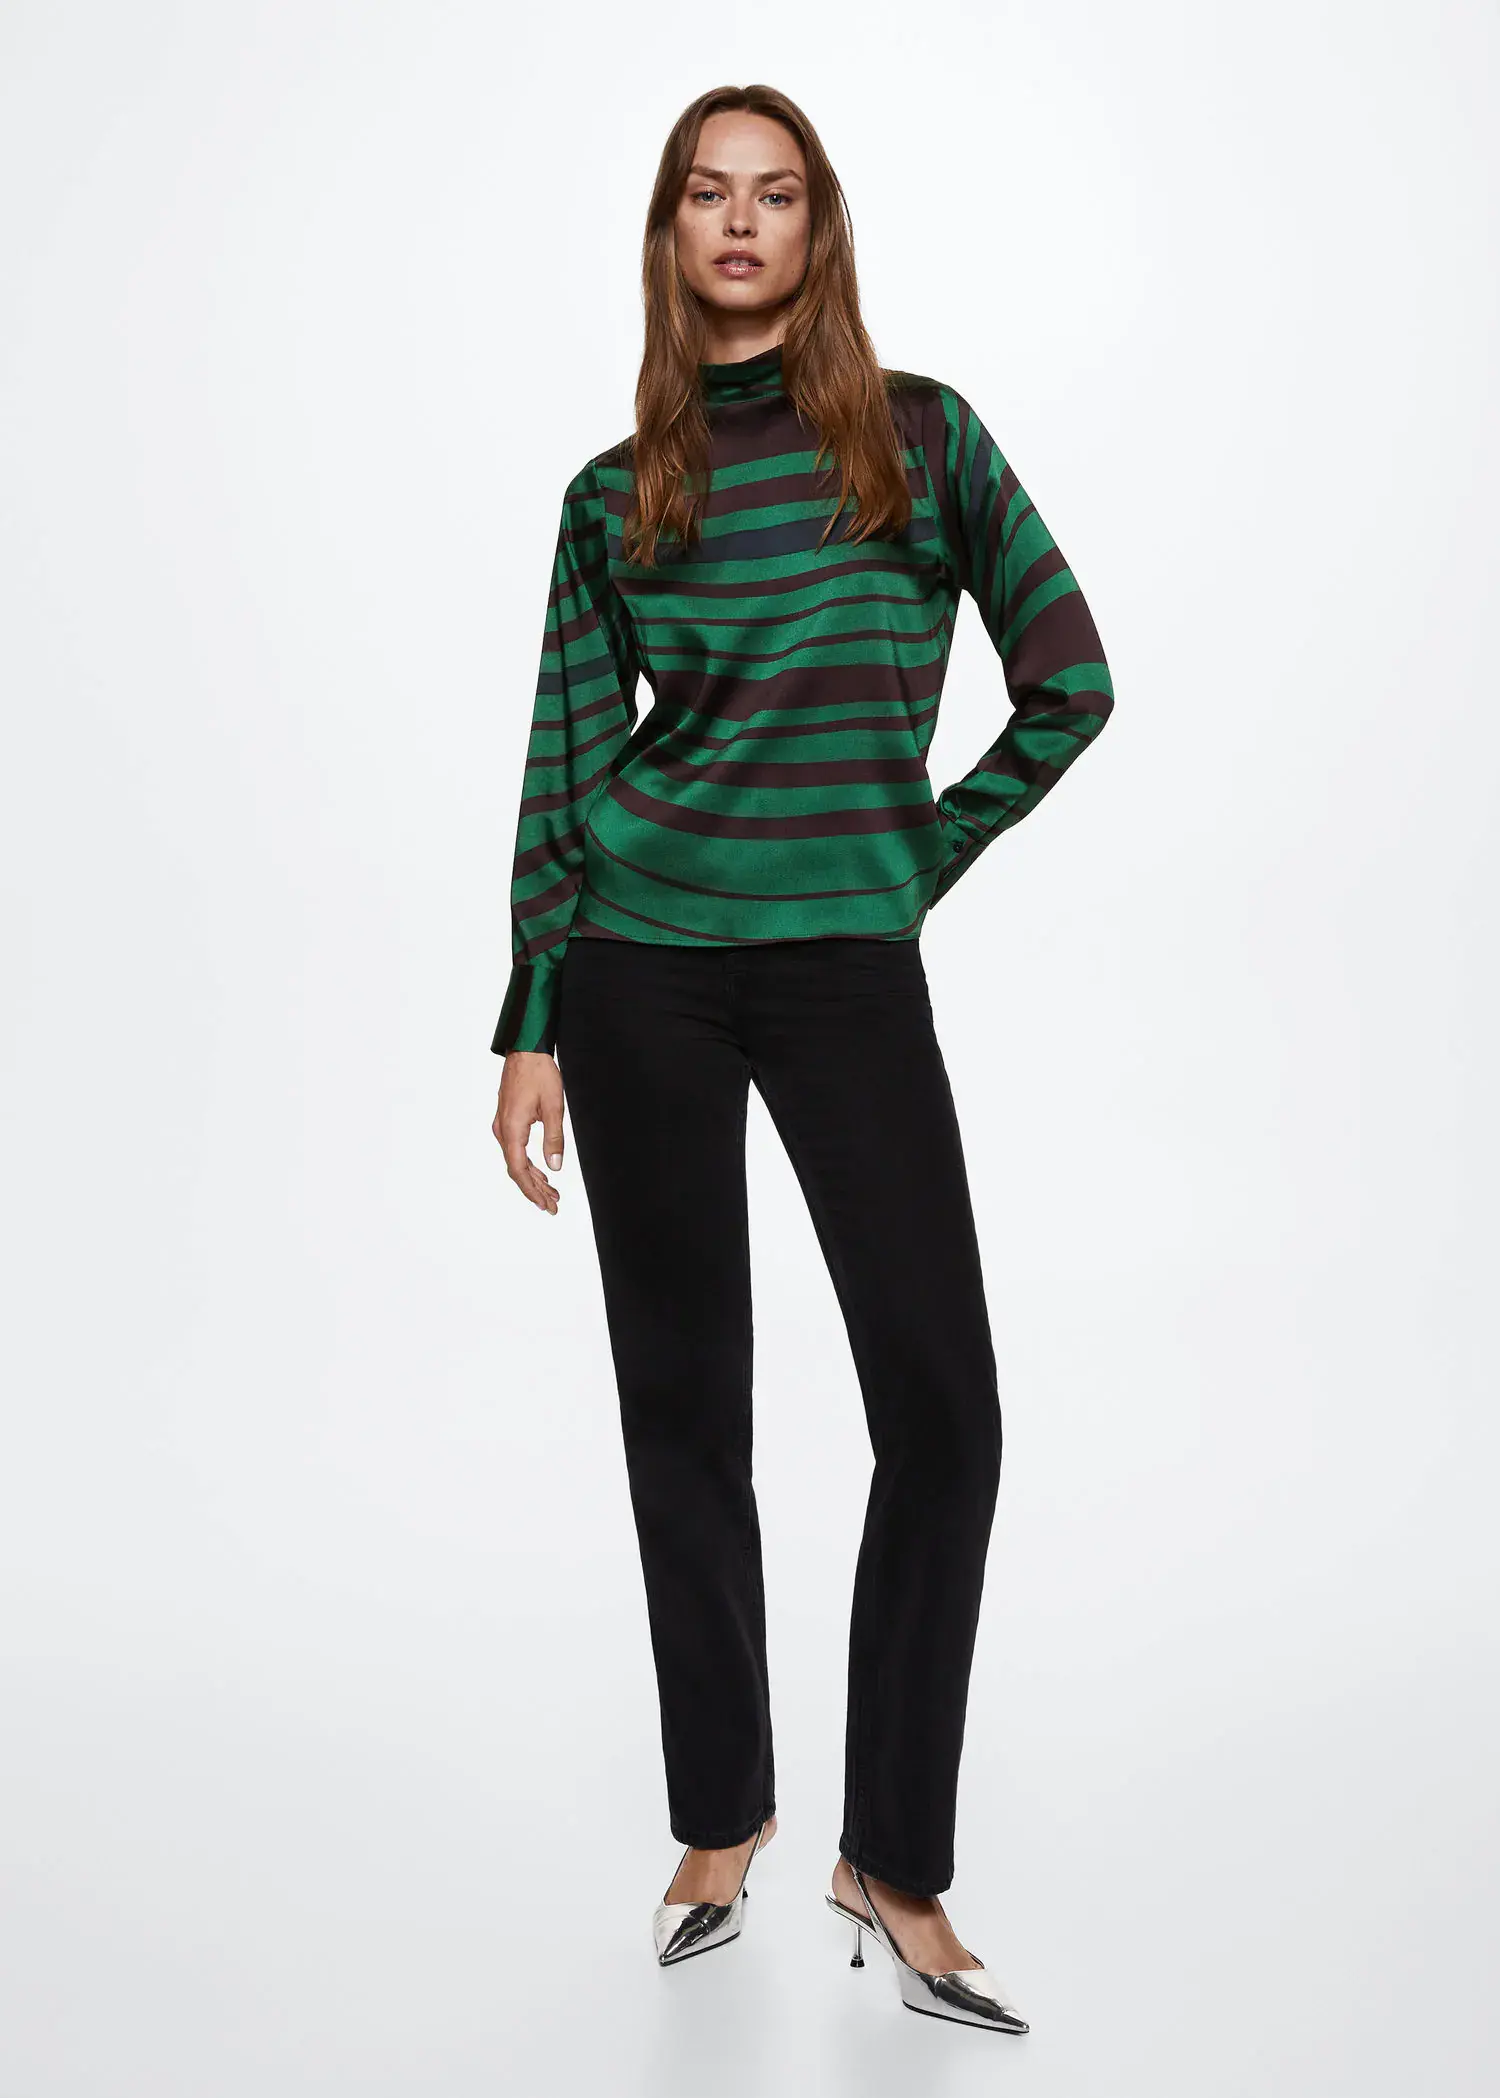 Mango High collar satin blouse. a woman wearing a green and black striped shirt and black pants. 